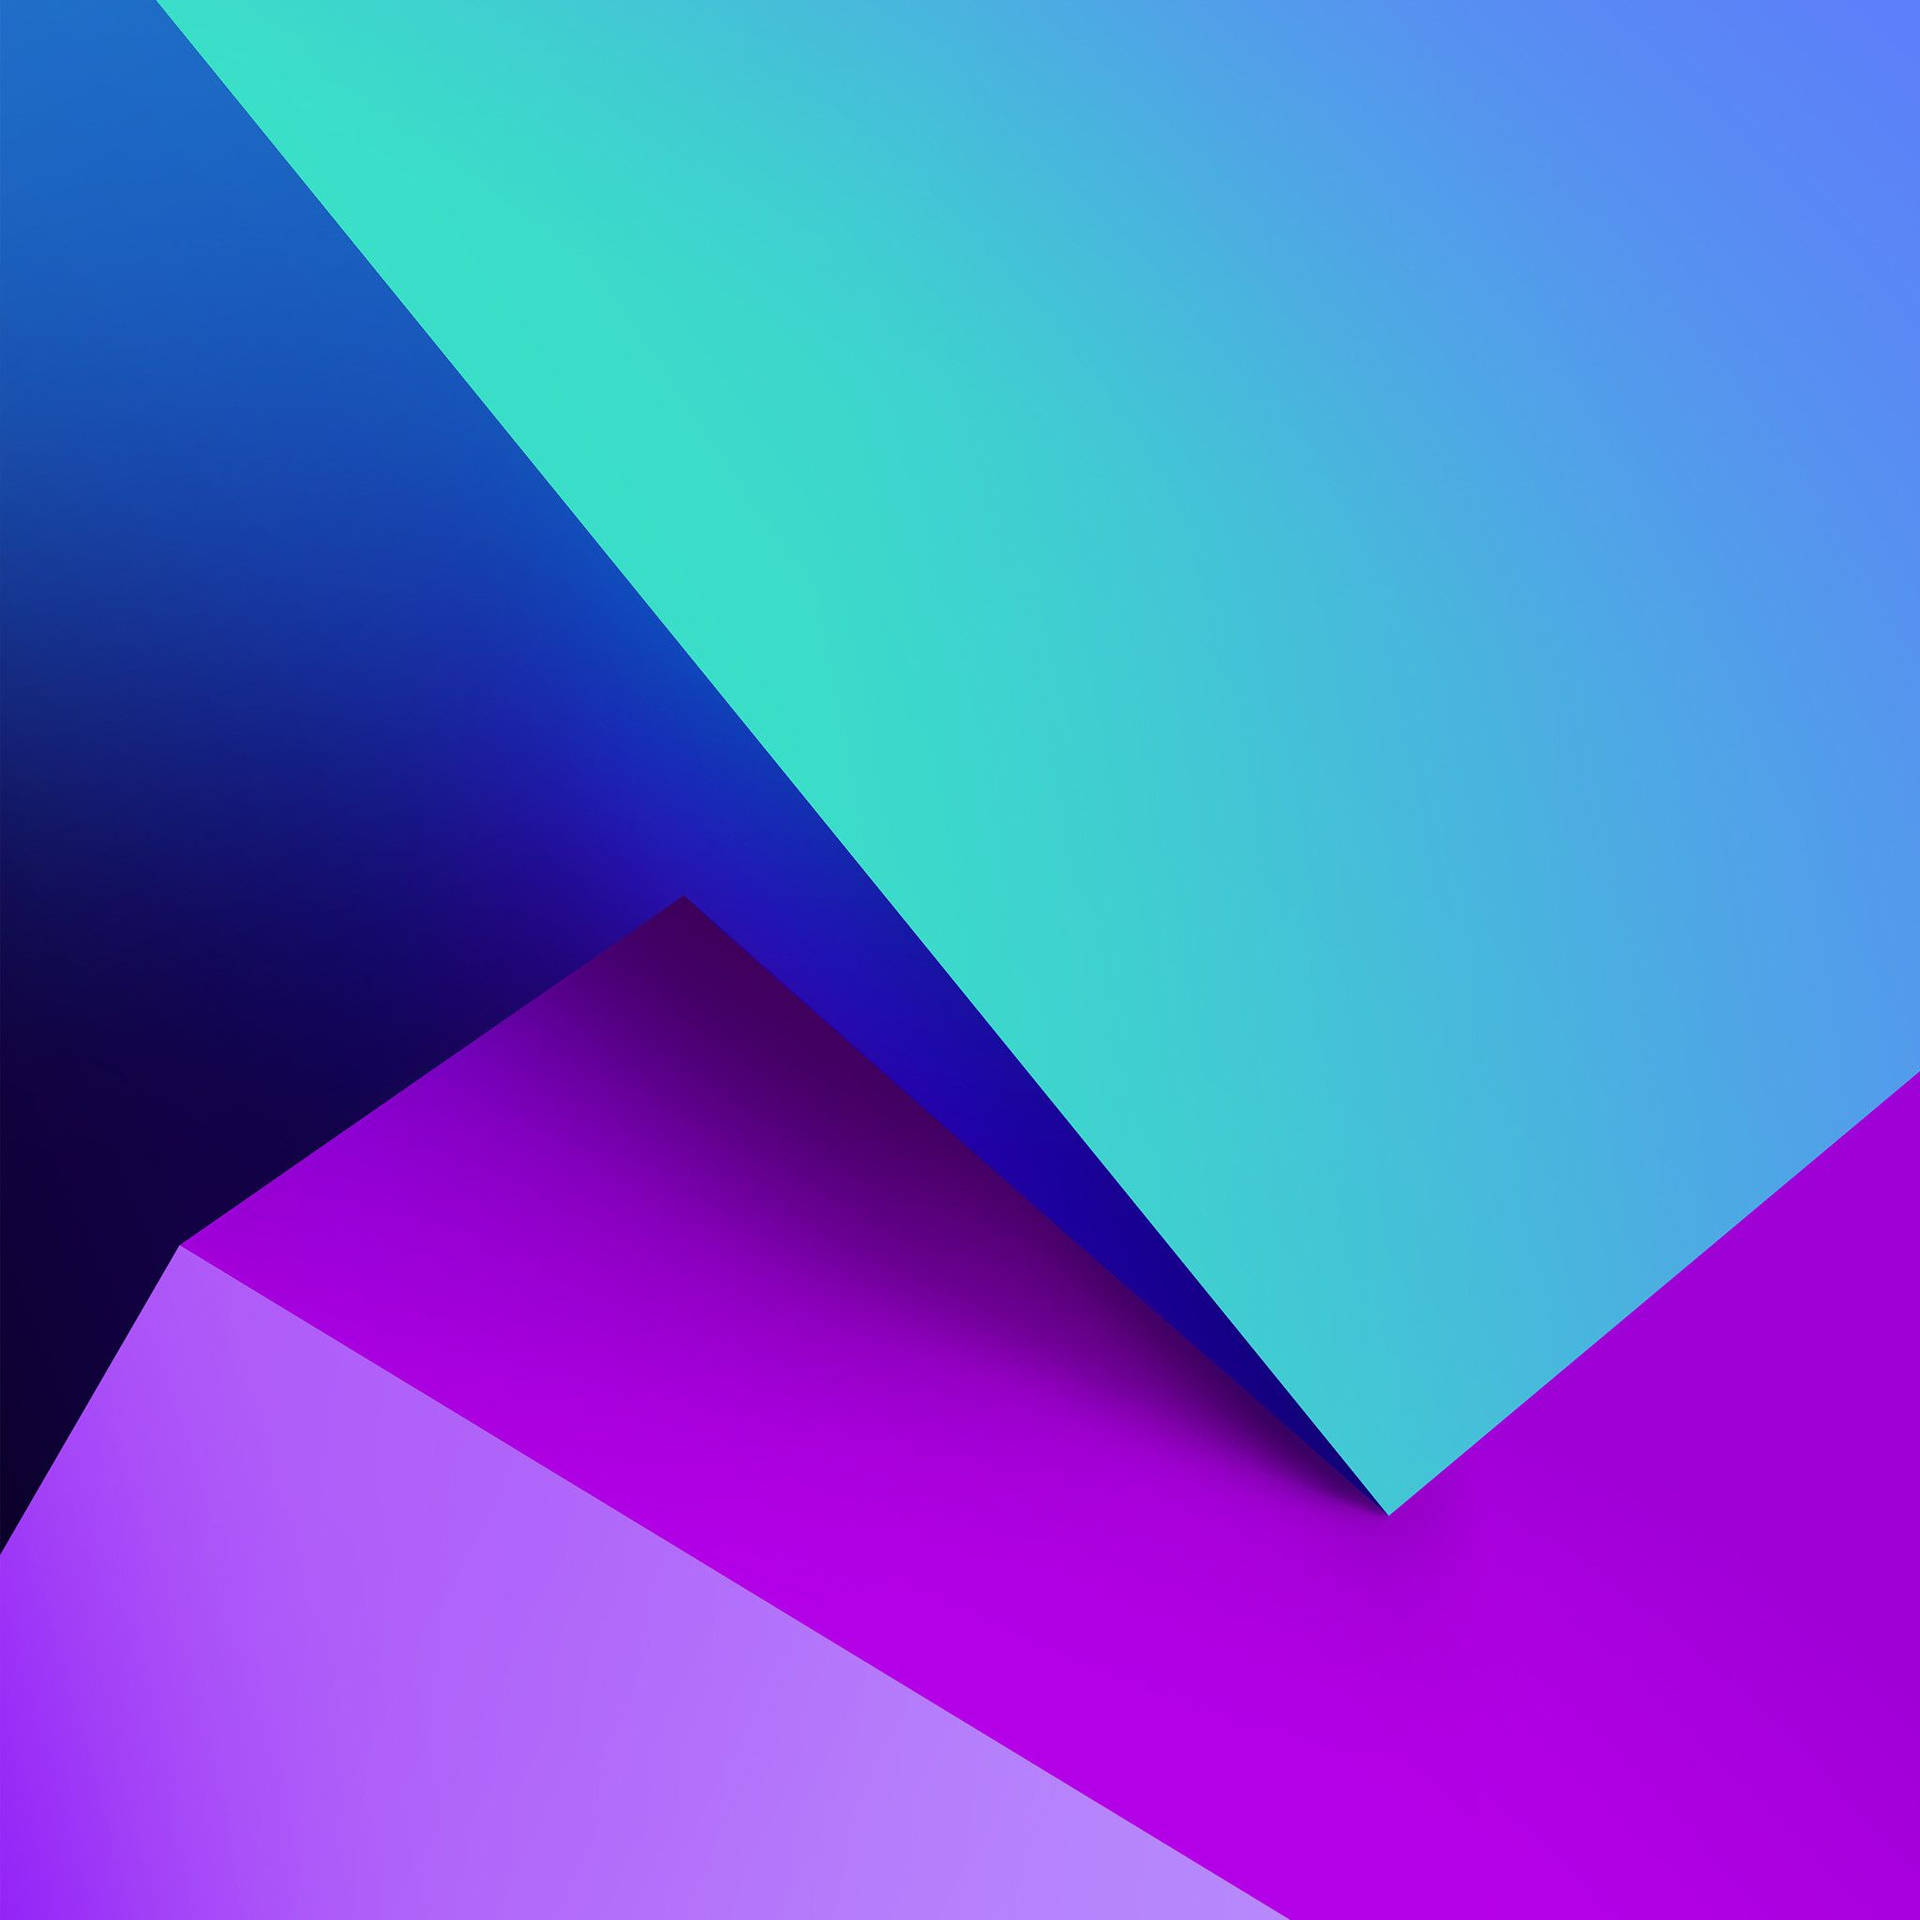 Geometric Pastel Shapes Samsung Galaxy Tablet Background